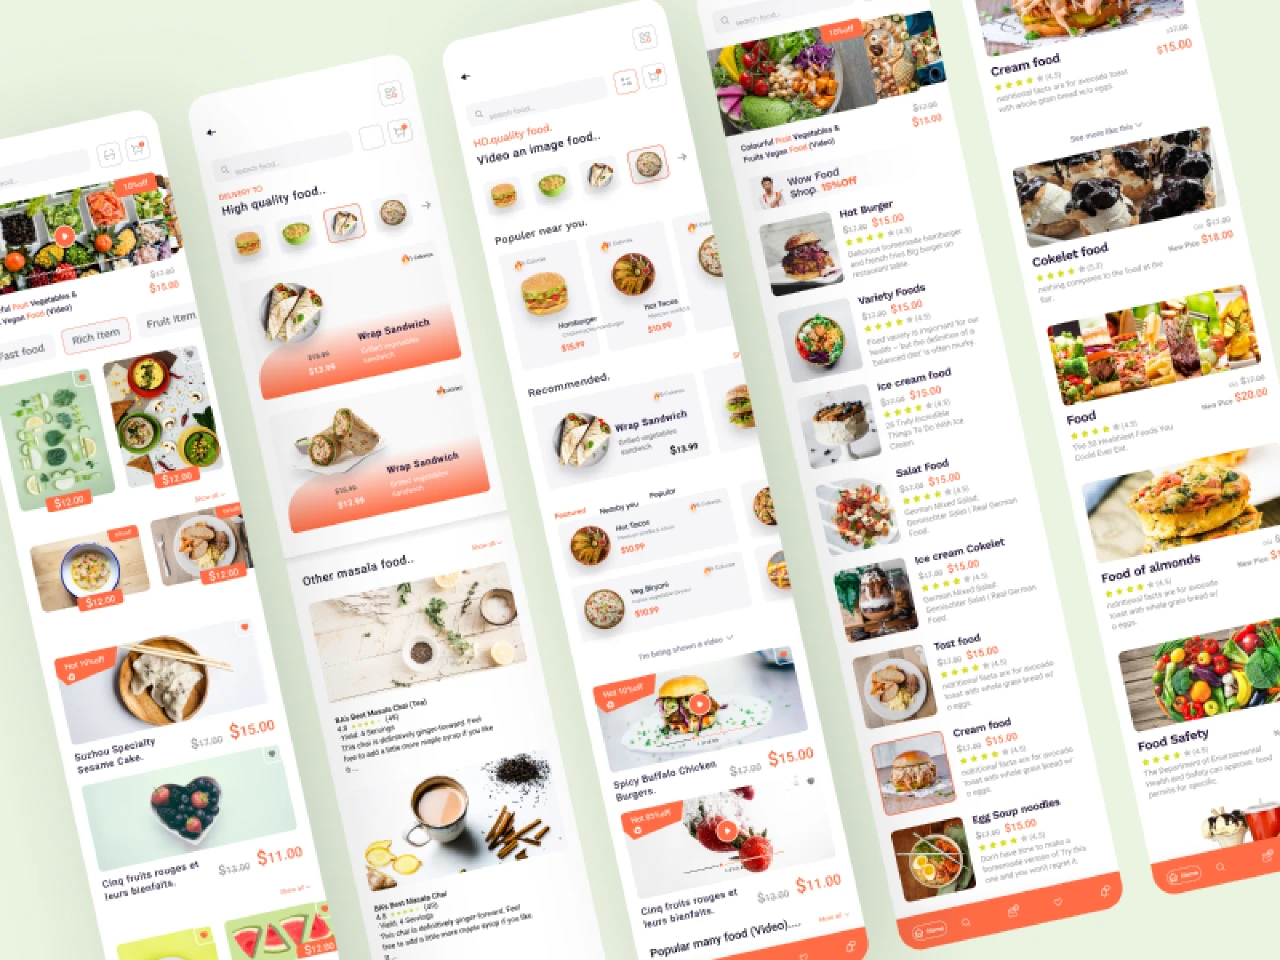 Full E-commence Food App Design for Figma and Adobe XD